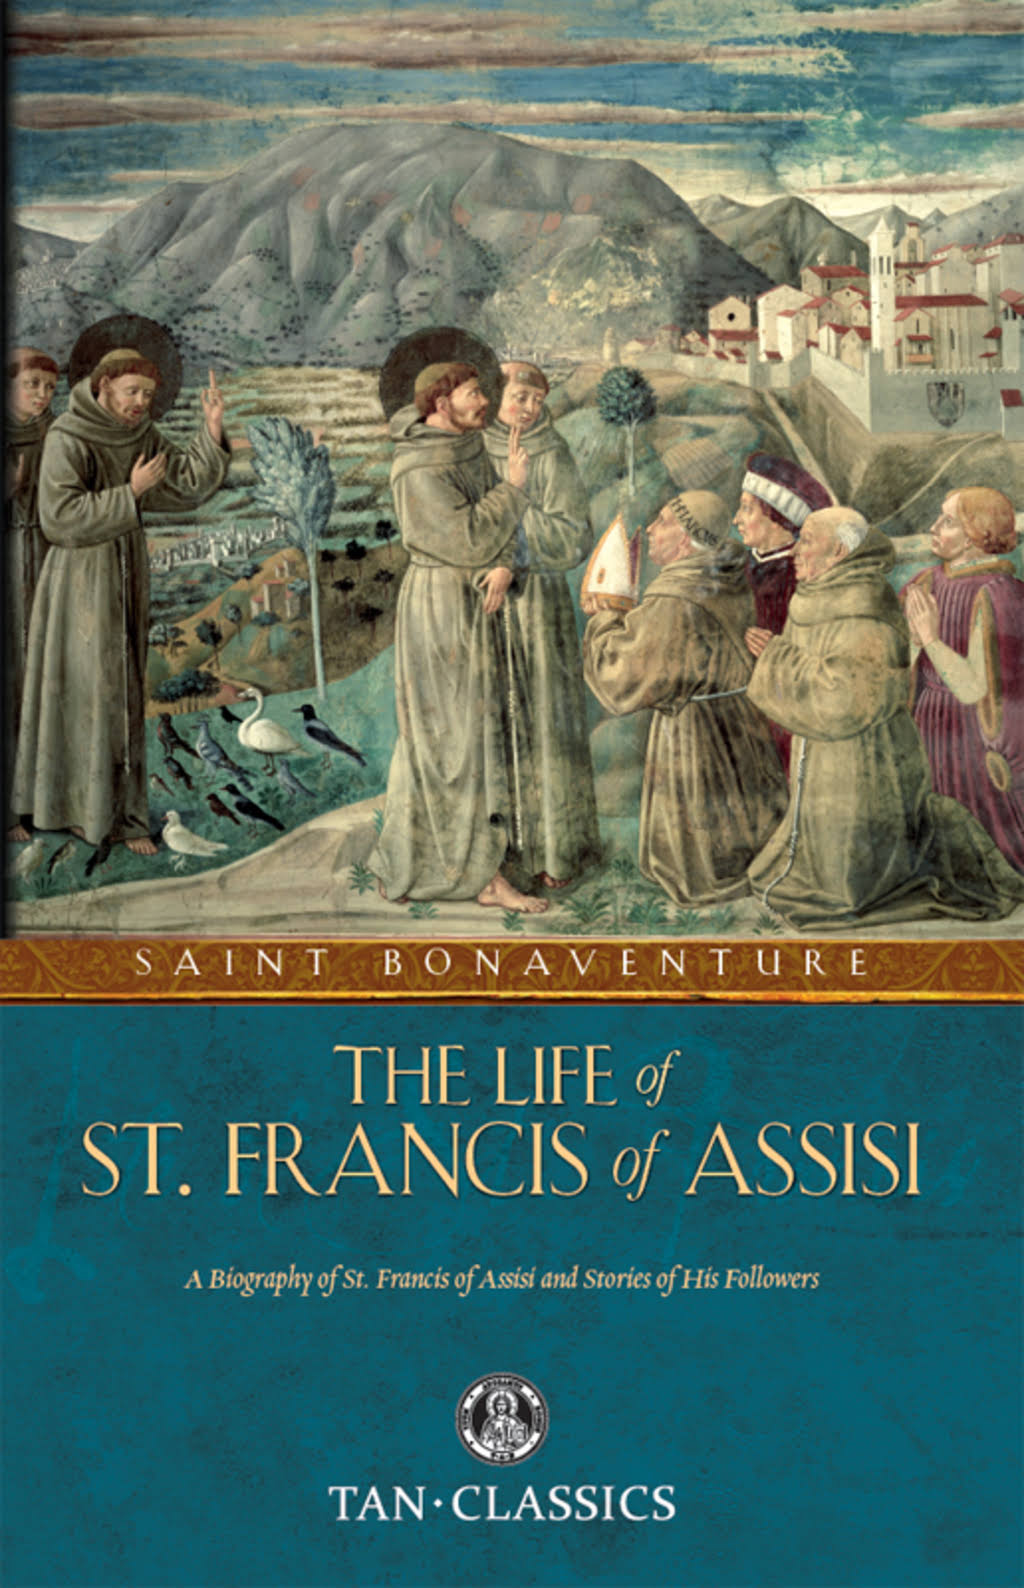 The Life of St. Francis of Assisi [Book]